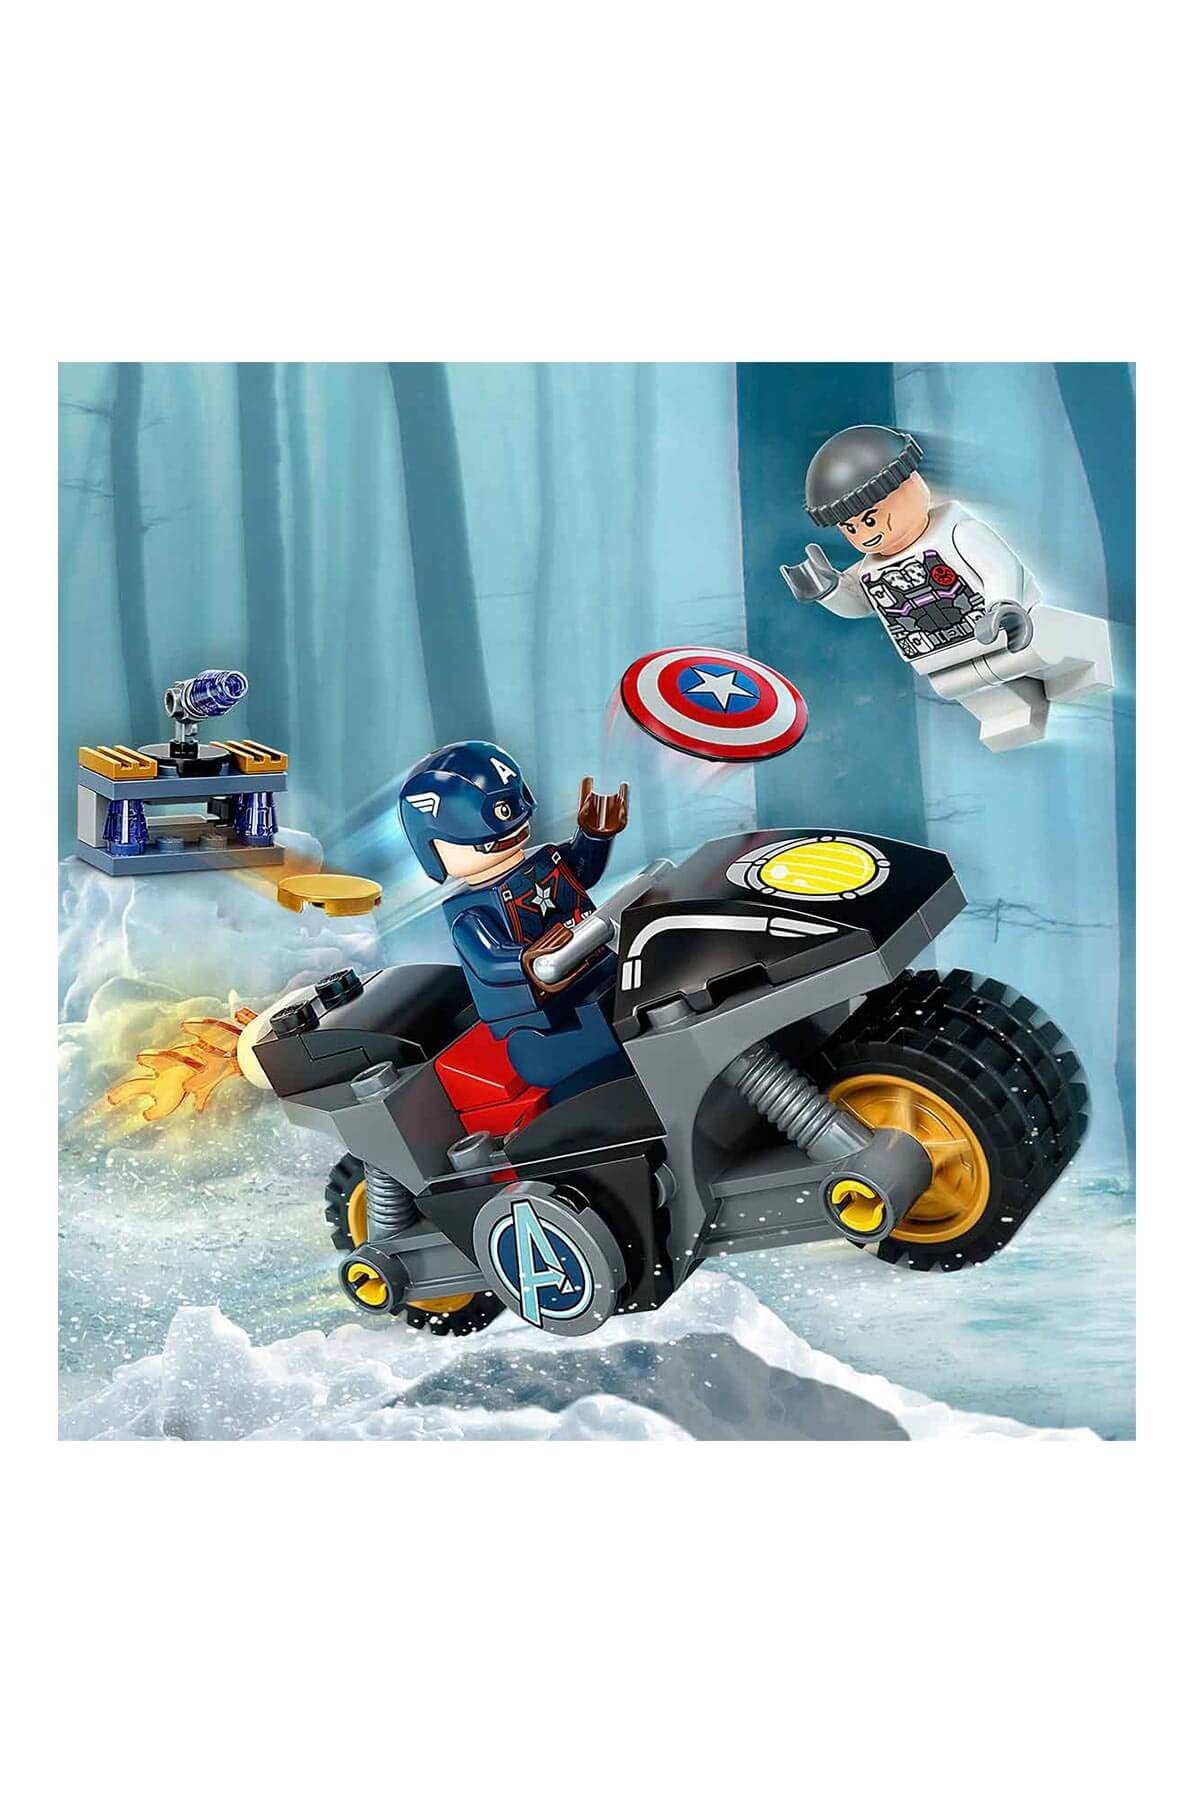 Lego Super Heroes Captain America and Hydra Face-Off